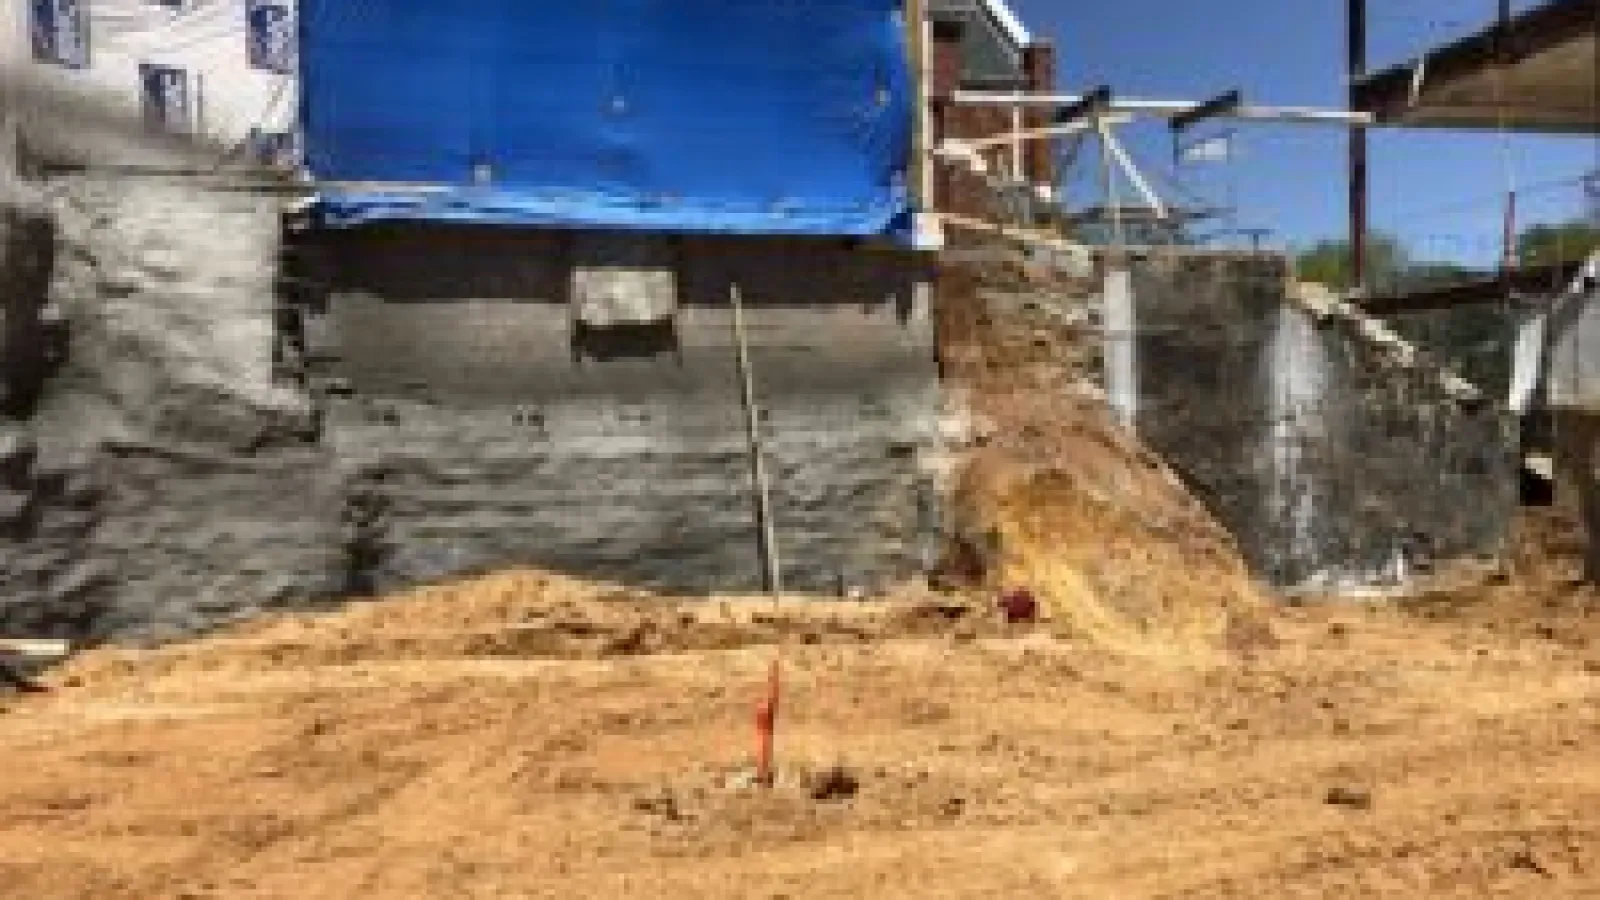 a construction site with a blue tarp